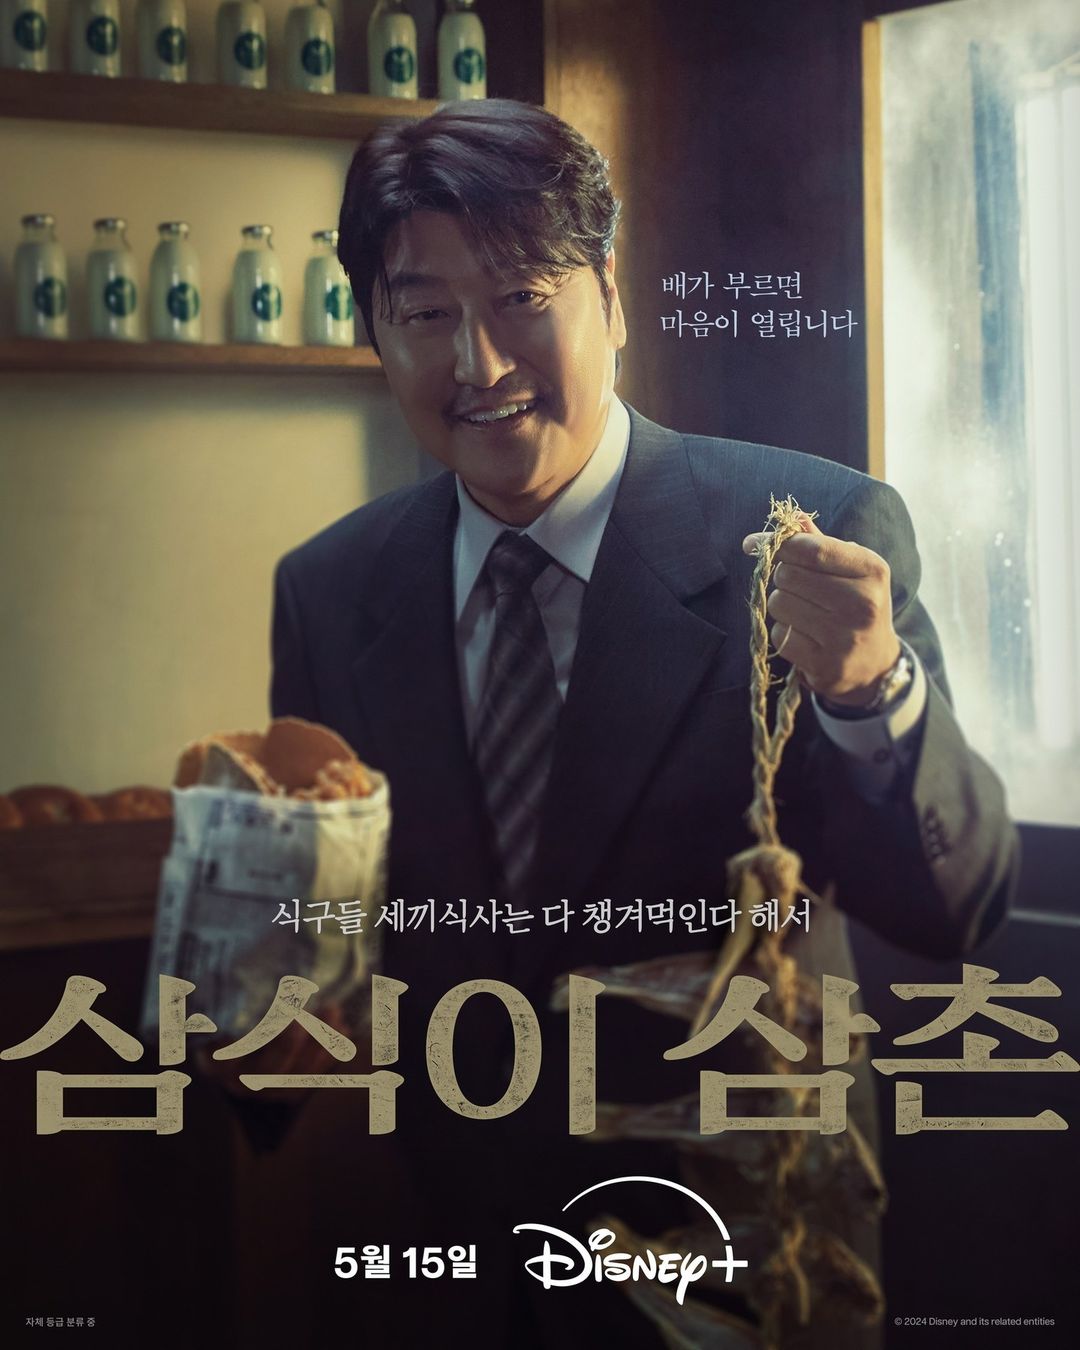 Watch: Everyone Calls Song Kang Ho By His Nickname In Teaser For Upcoming Drama 